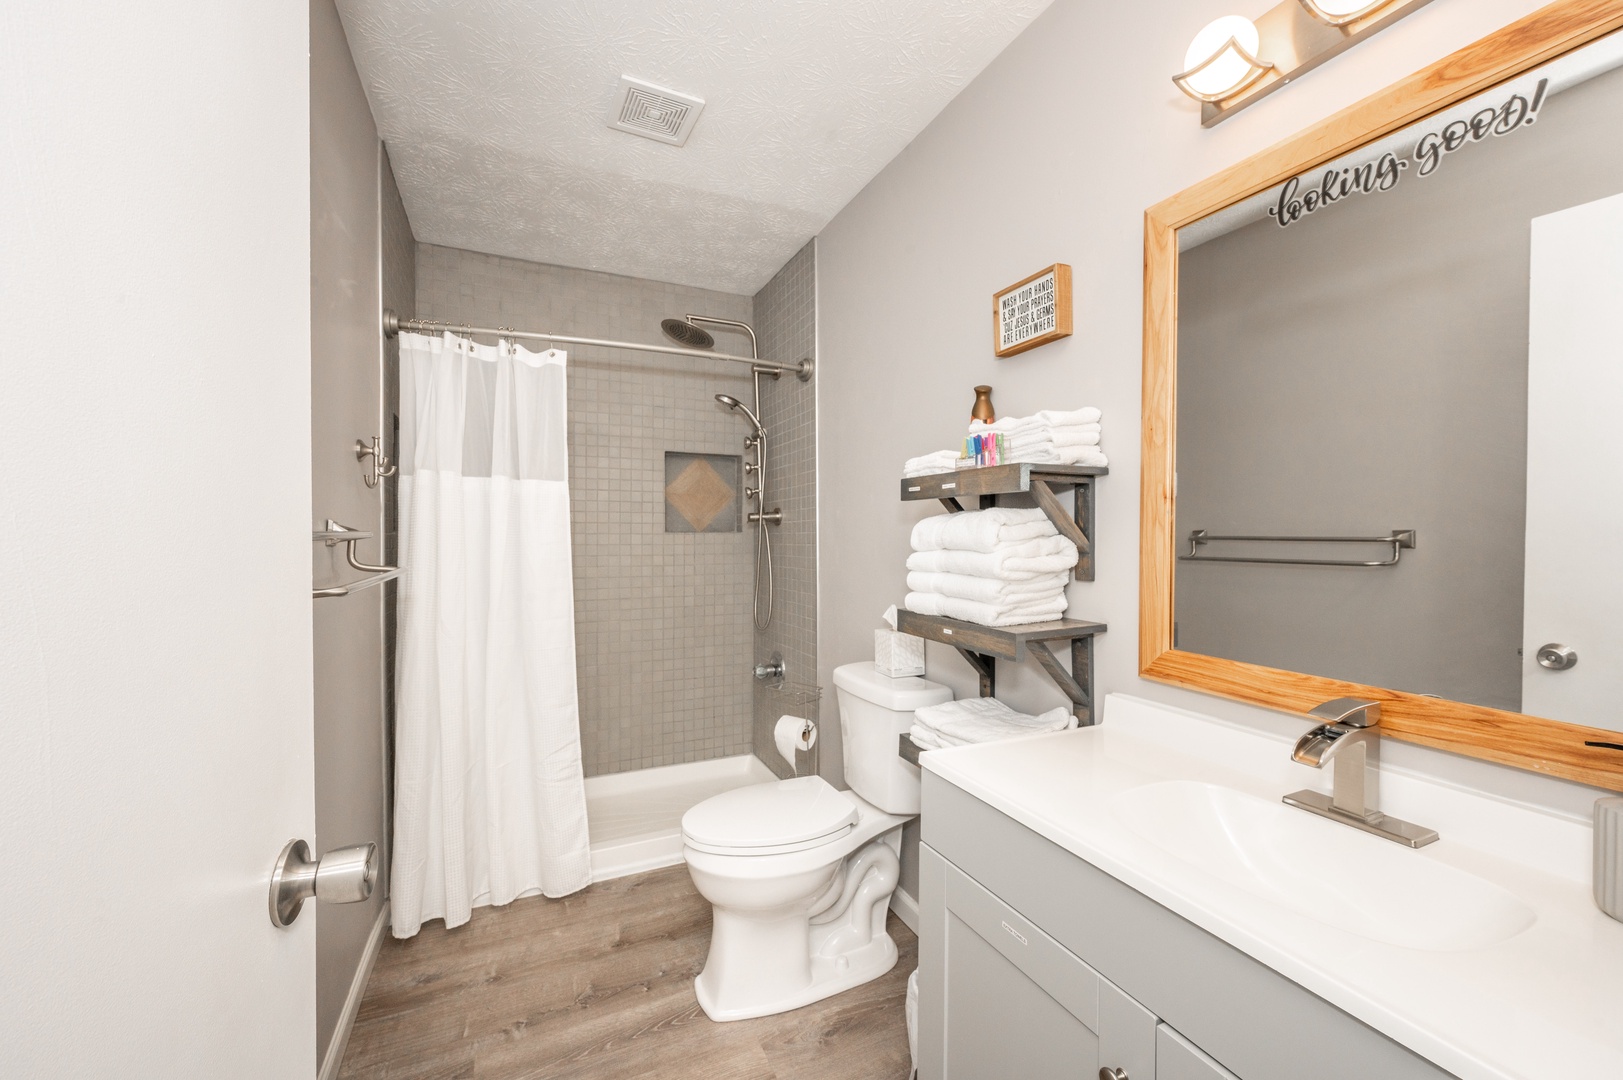 This full bath in Apartment 3 includes a single vanity & walk-in shower